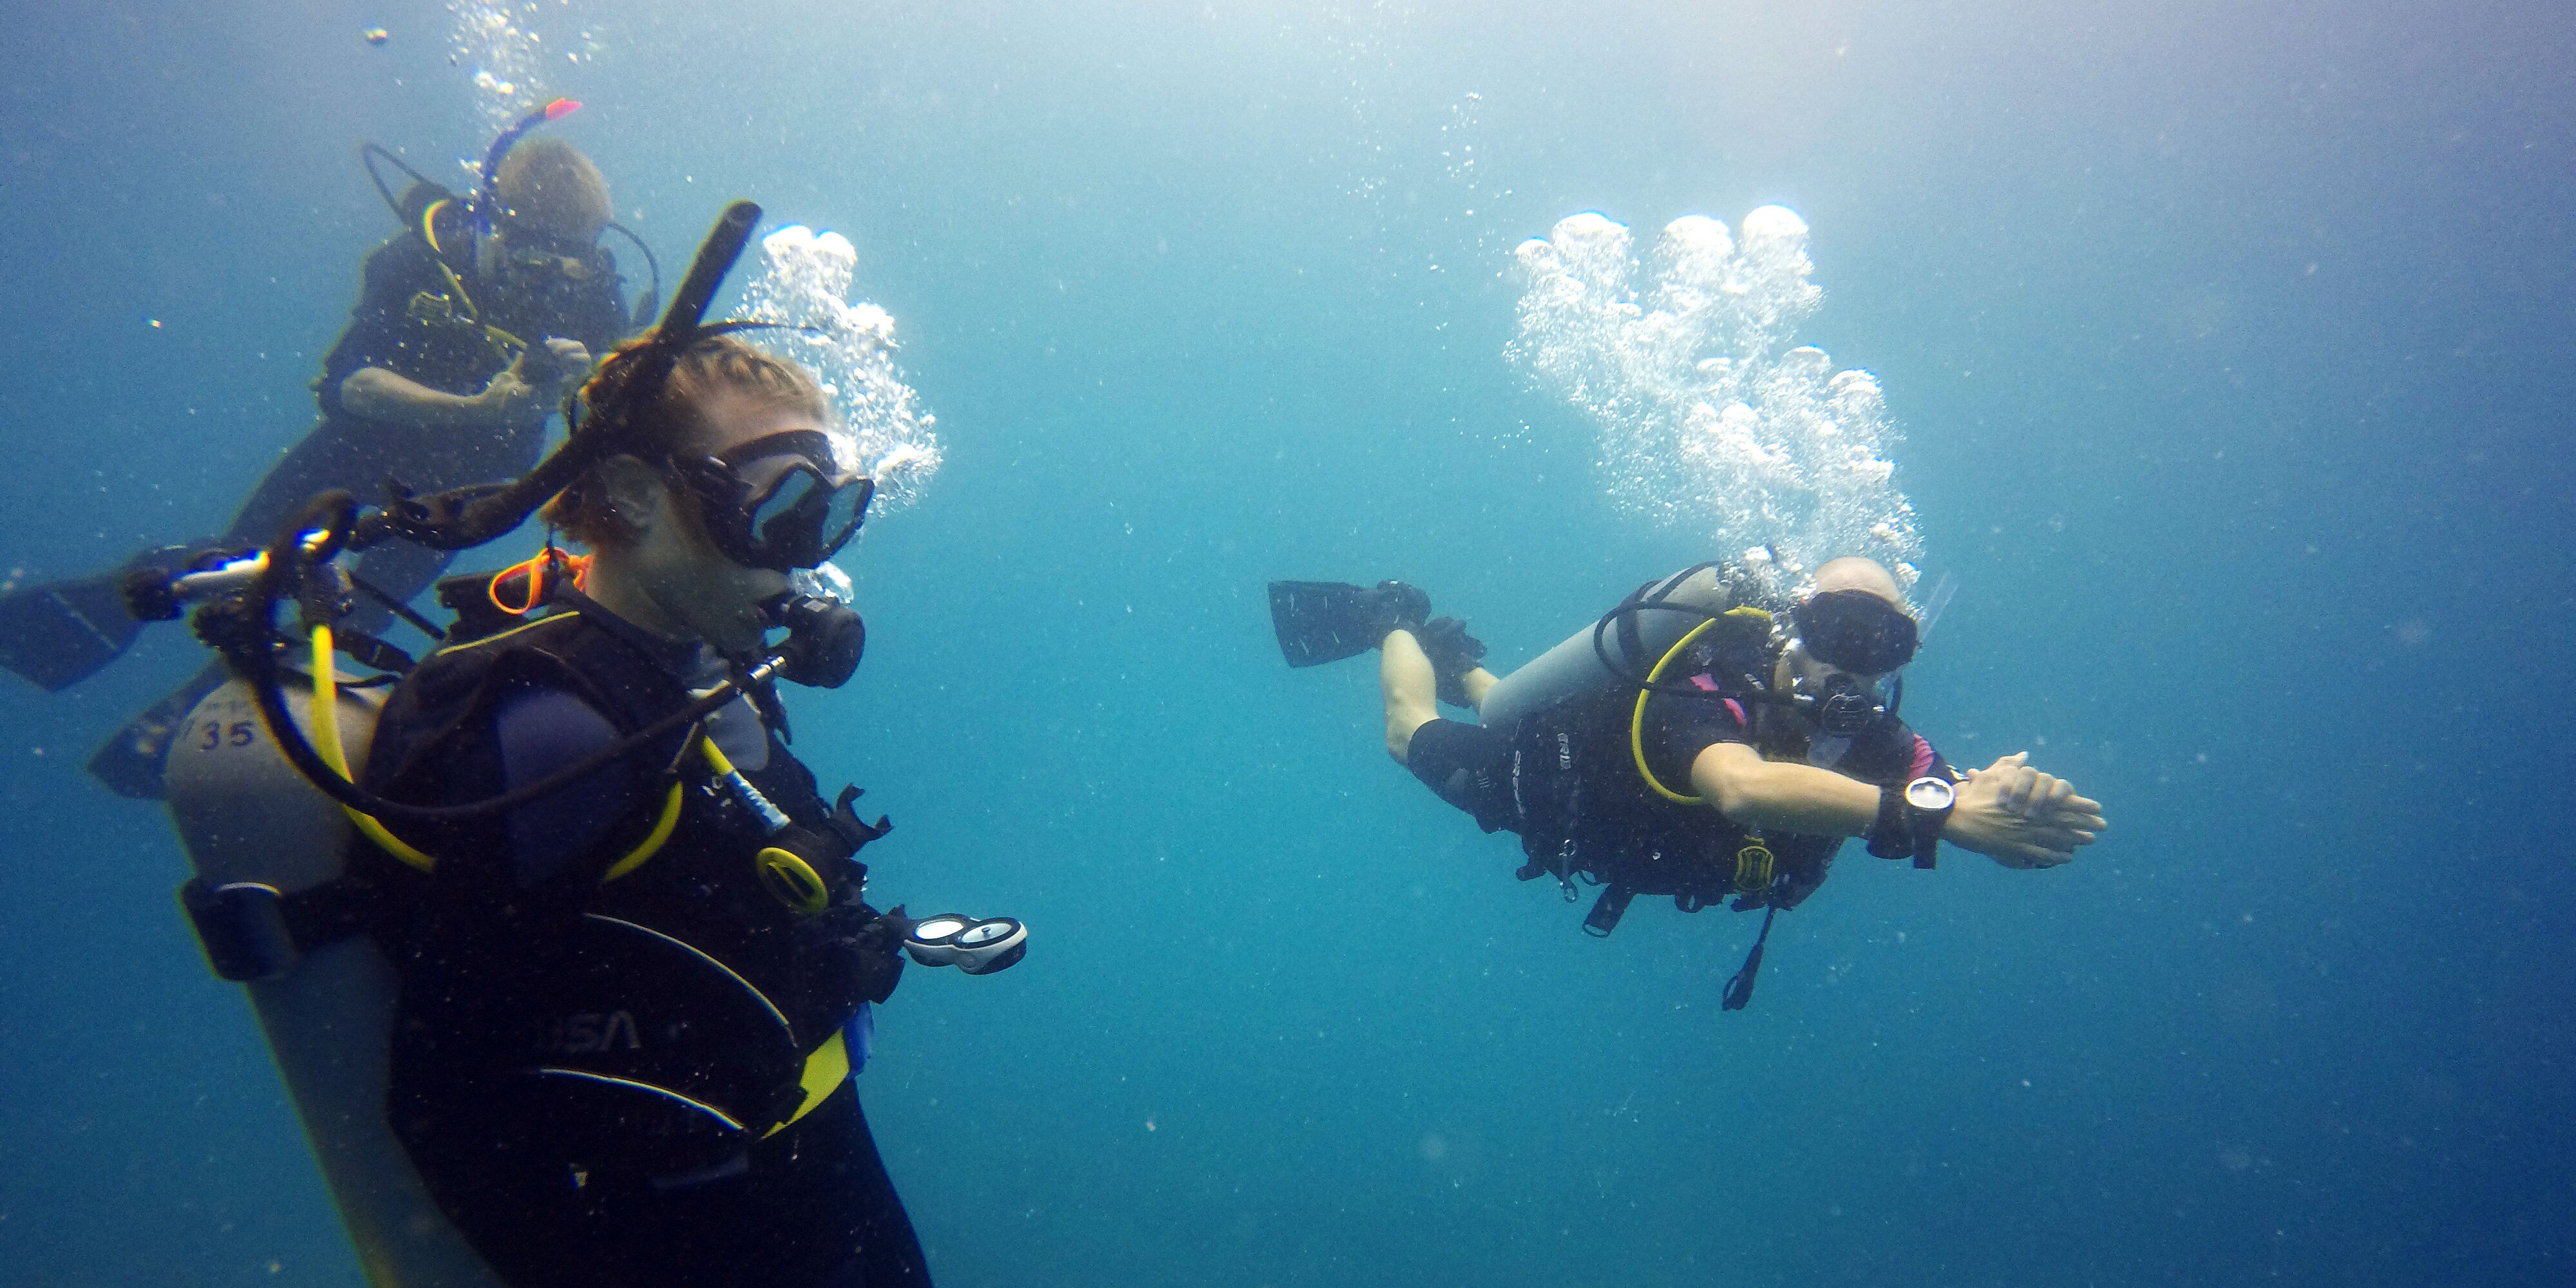 GVI participants practise diving skills. Learning a new skill like diving is one of the top reasons to take a career break.